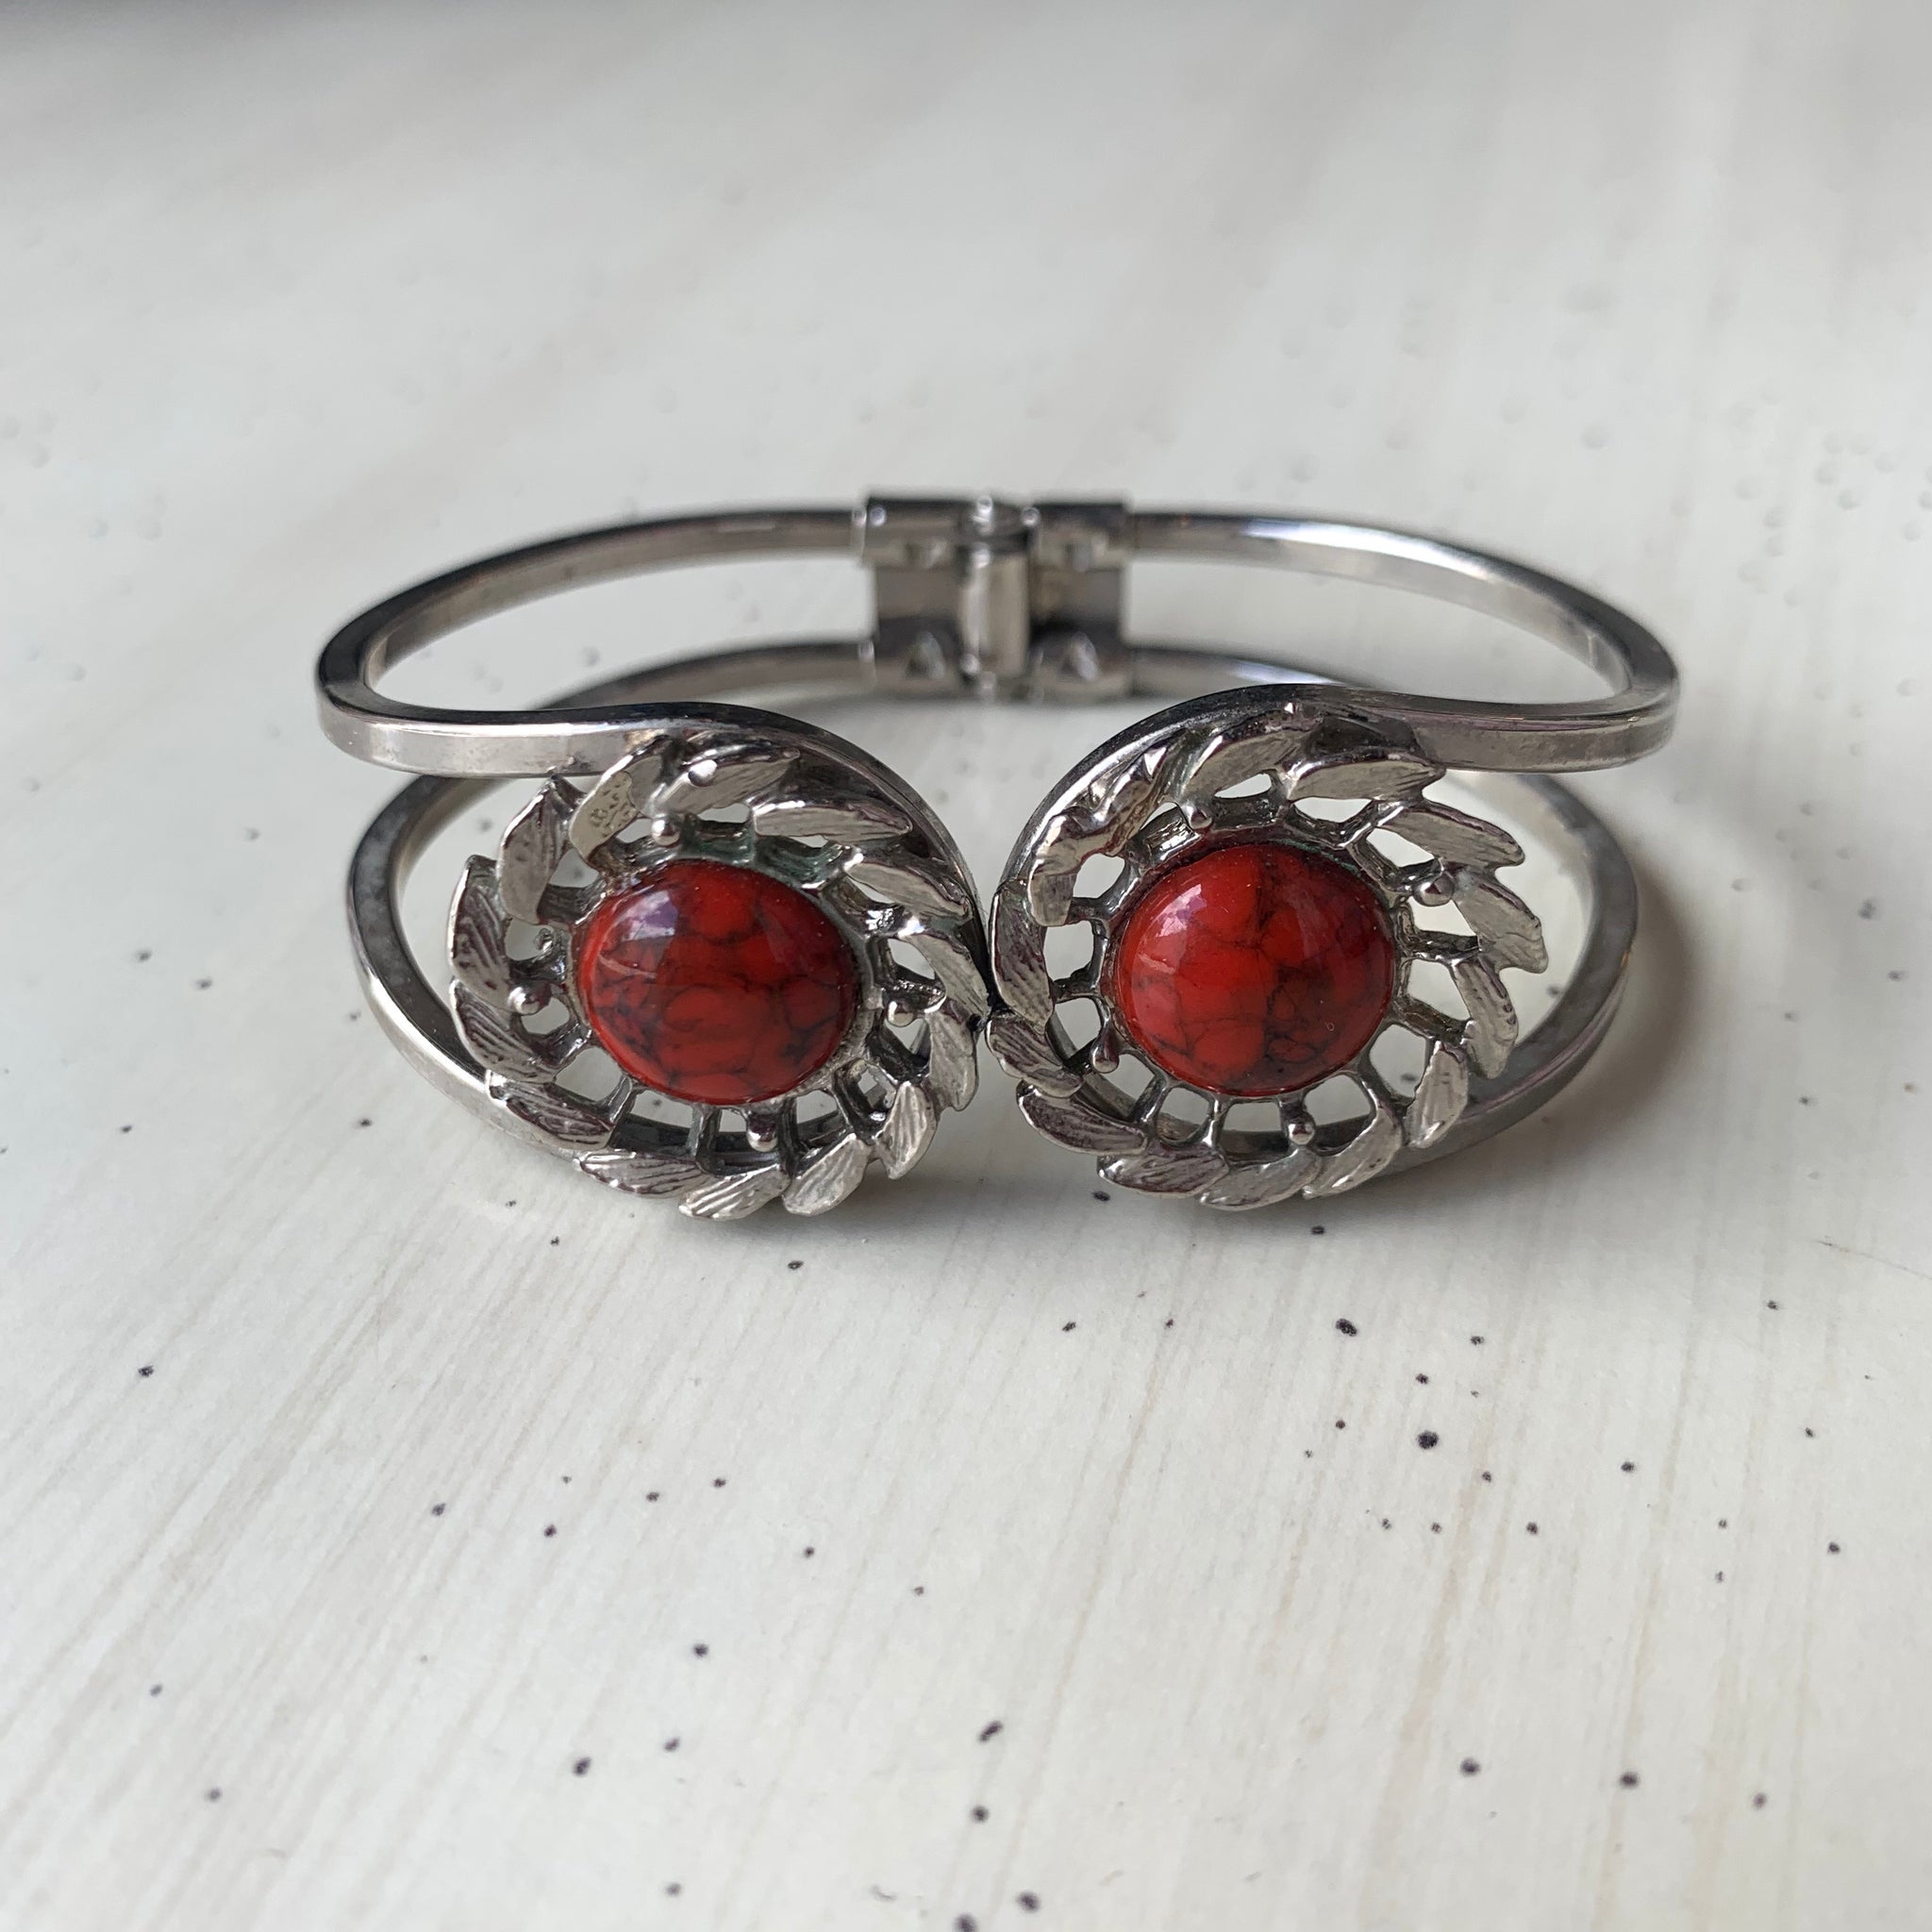 1970s Red Cabochon Clamp Bangle